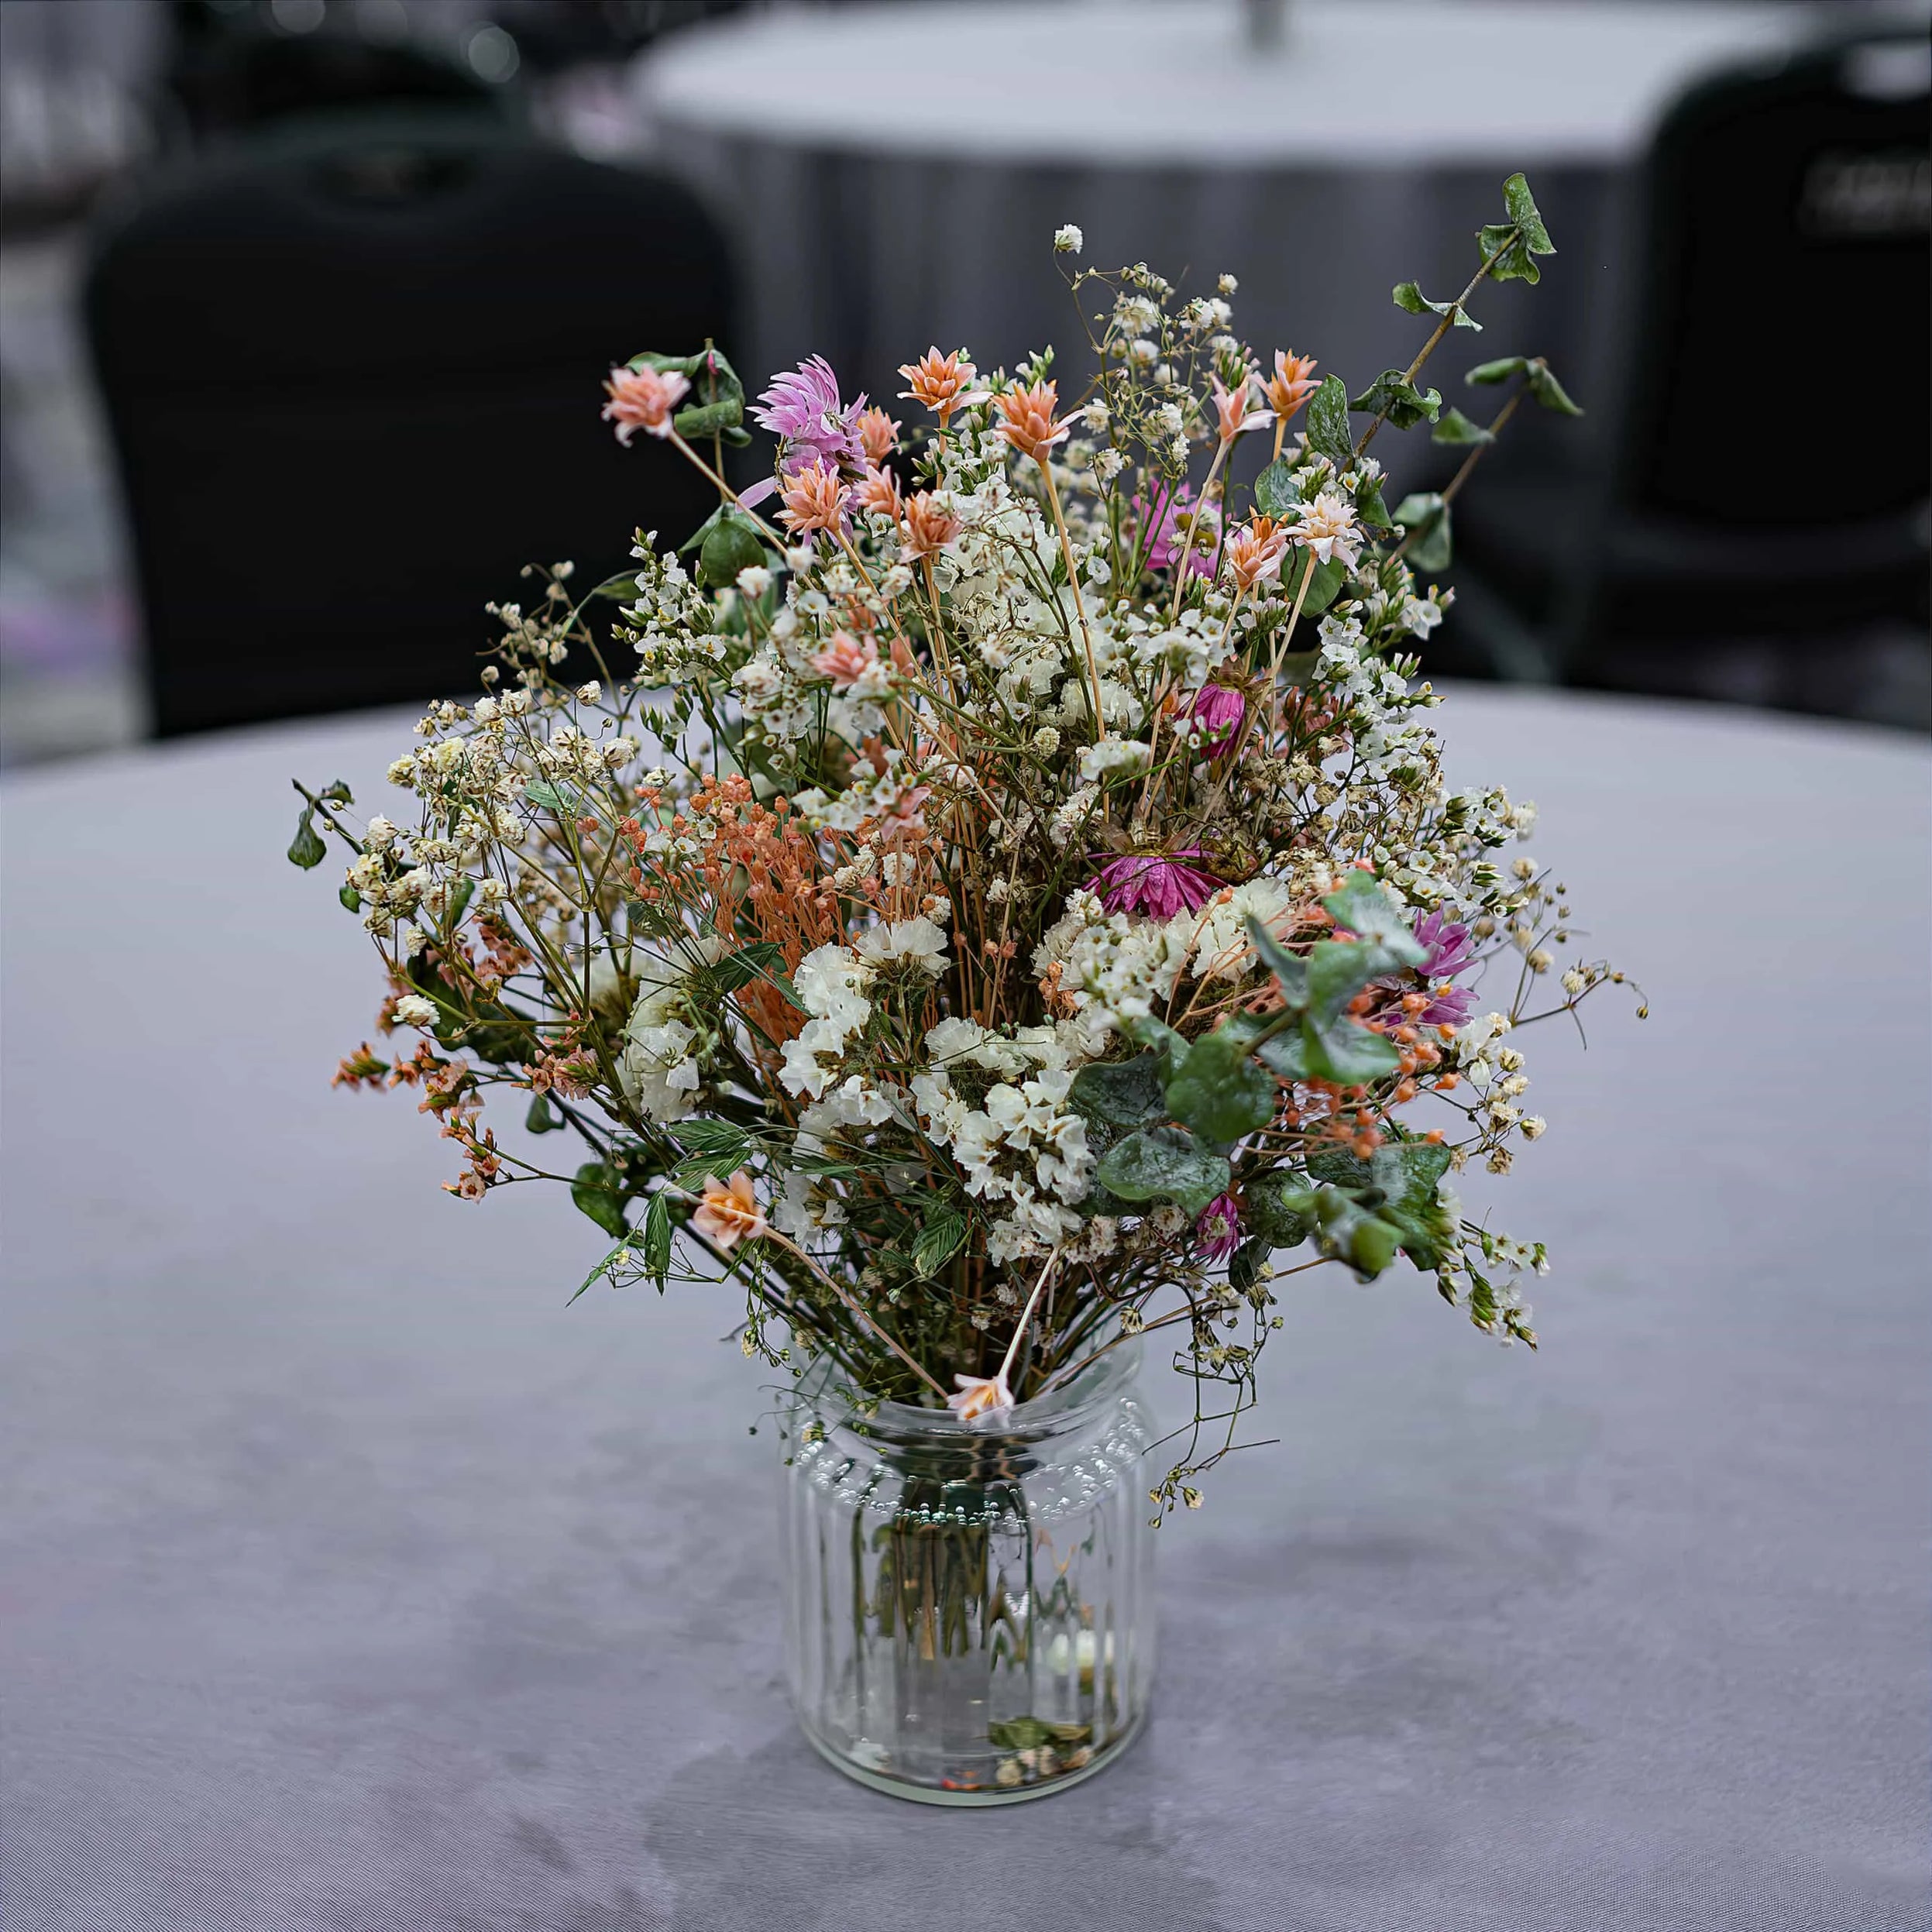 Rustic wildflower arrangement in a clear jar by Amaranté London at the Formula E event, combining orange, pink, and white blooms with green accents on a grey clothed table, enhancing the naturalistic setting.